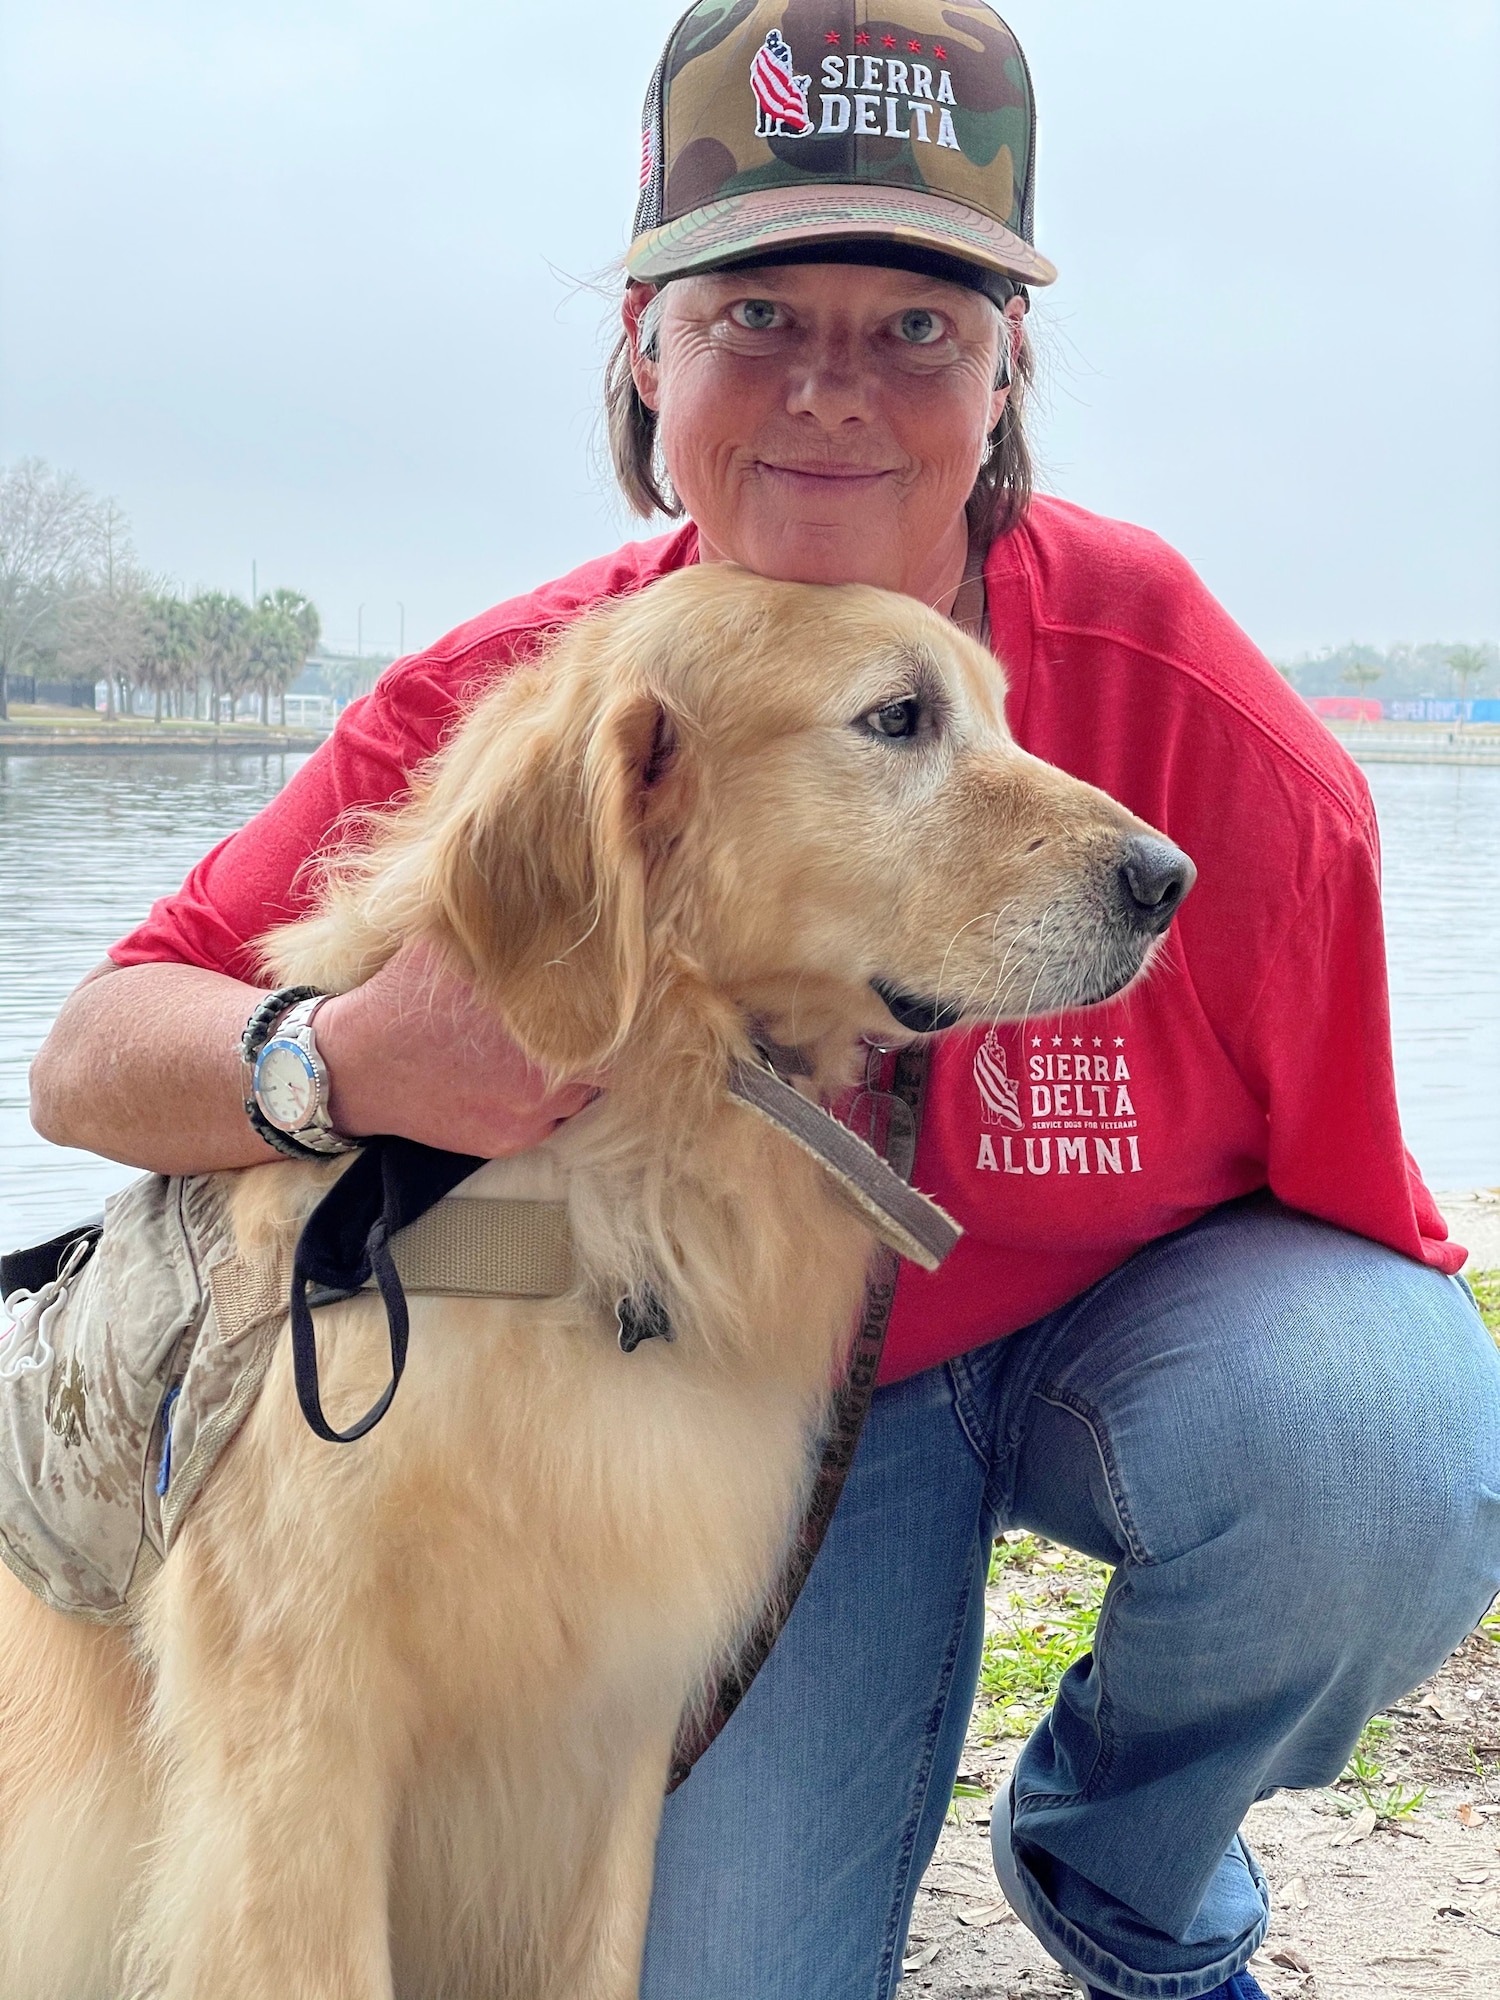 Kelly Smith, a U.S. Navy veteran, holds her service dog, Cook, following the ‘Salute-To-Service-Stroll’ Feb. 6, 2021, at the Tampa Riverwalk, Tampa, Florida. Smith and Cook have been soulmates for five years. (U.S. Army photo by Spc. Robert Vicens)